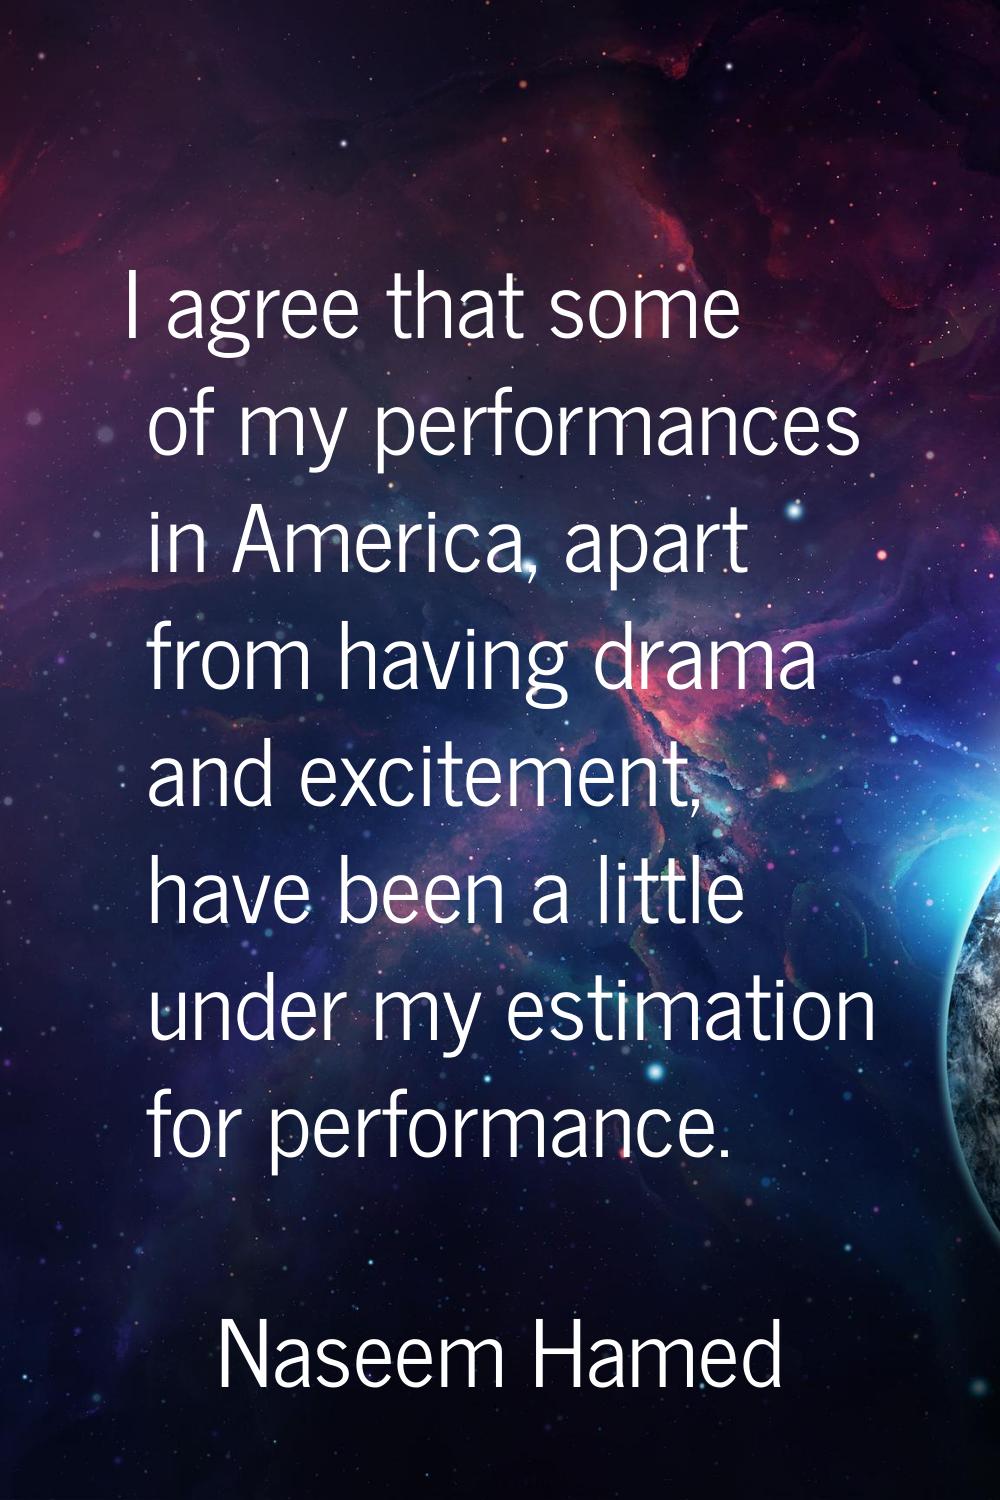 I agree that some of my performances in America, apart from having drama and excitement, have been 